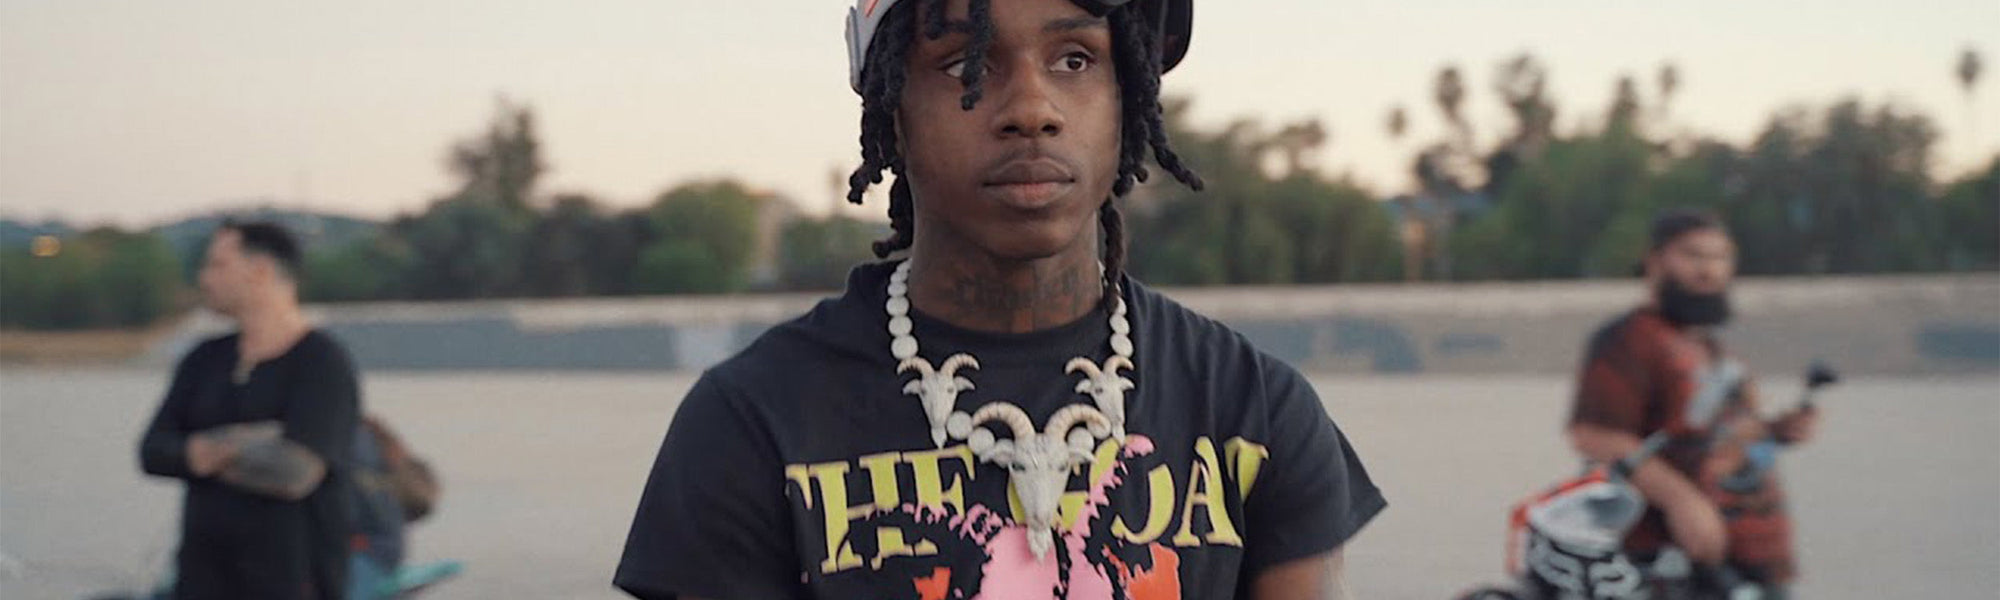 How Much Is Polo G’s Jewelry Worth?